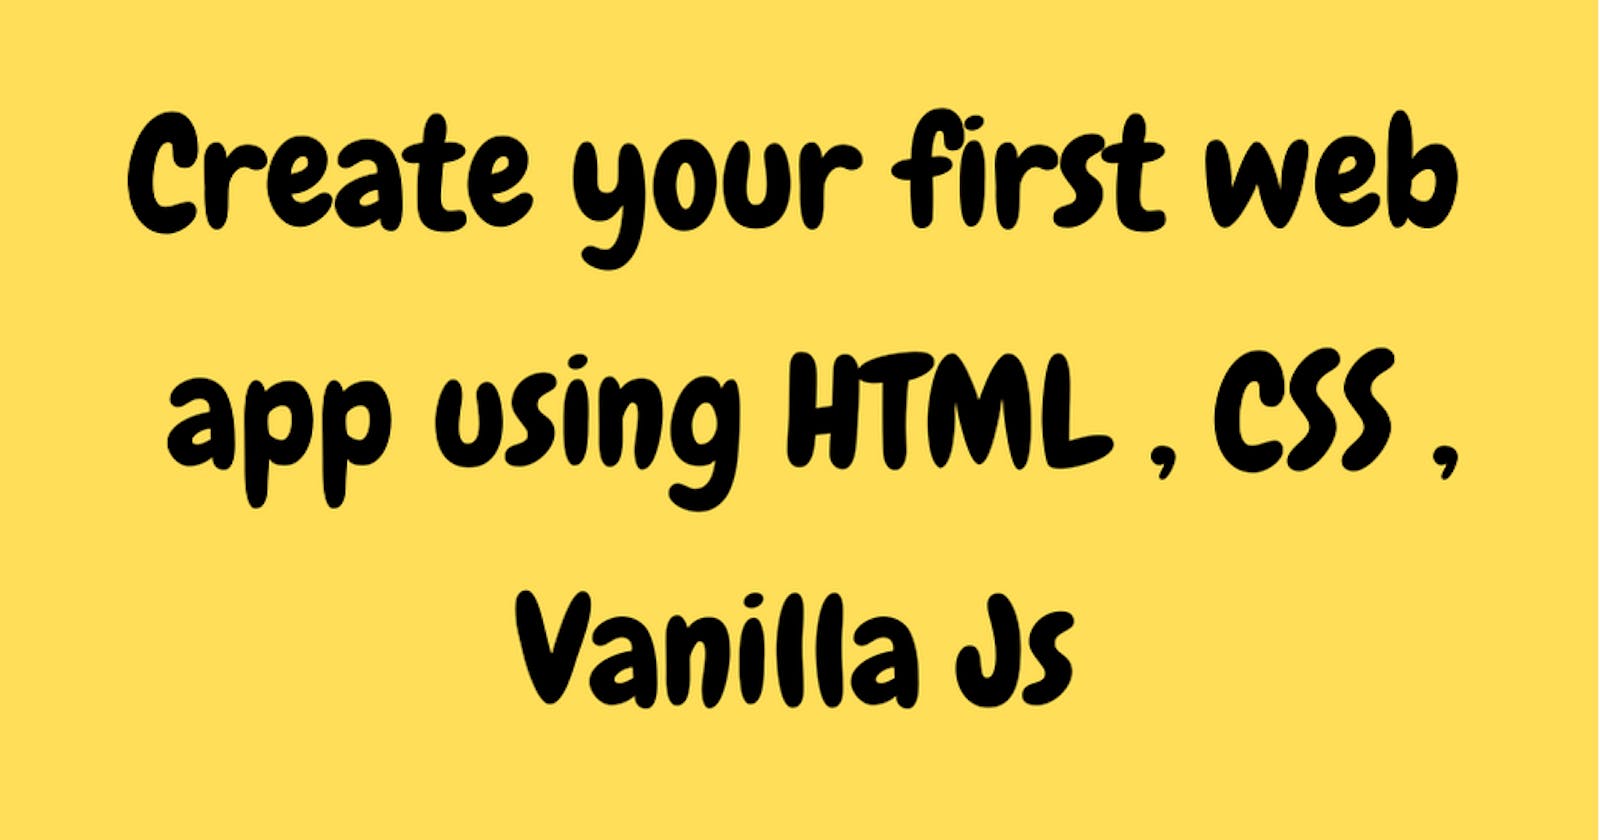 Create your first web app using HTML , CSS and Vanilla JS